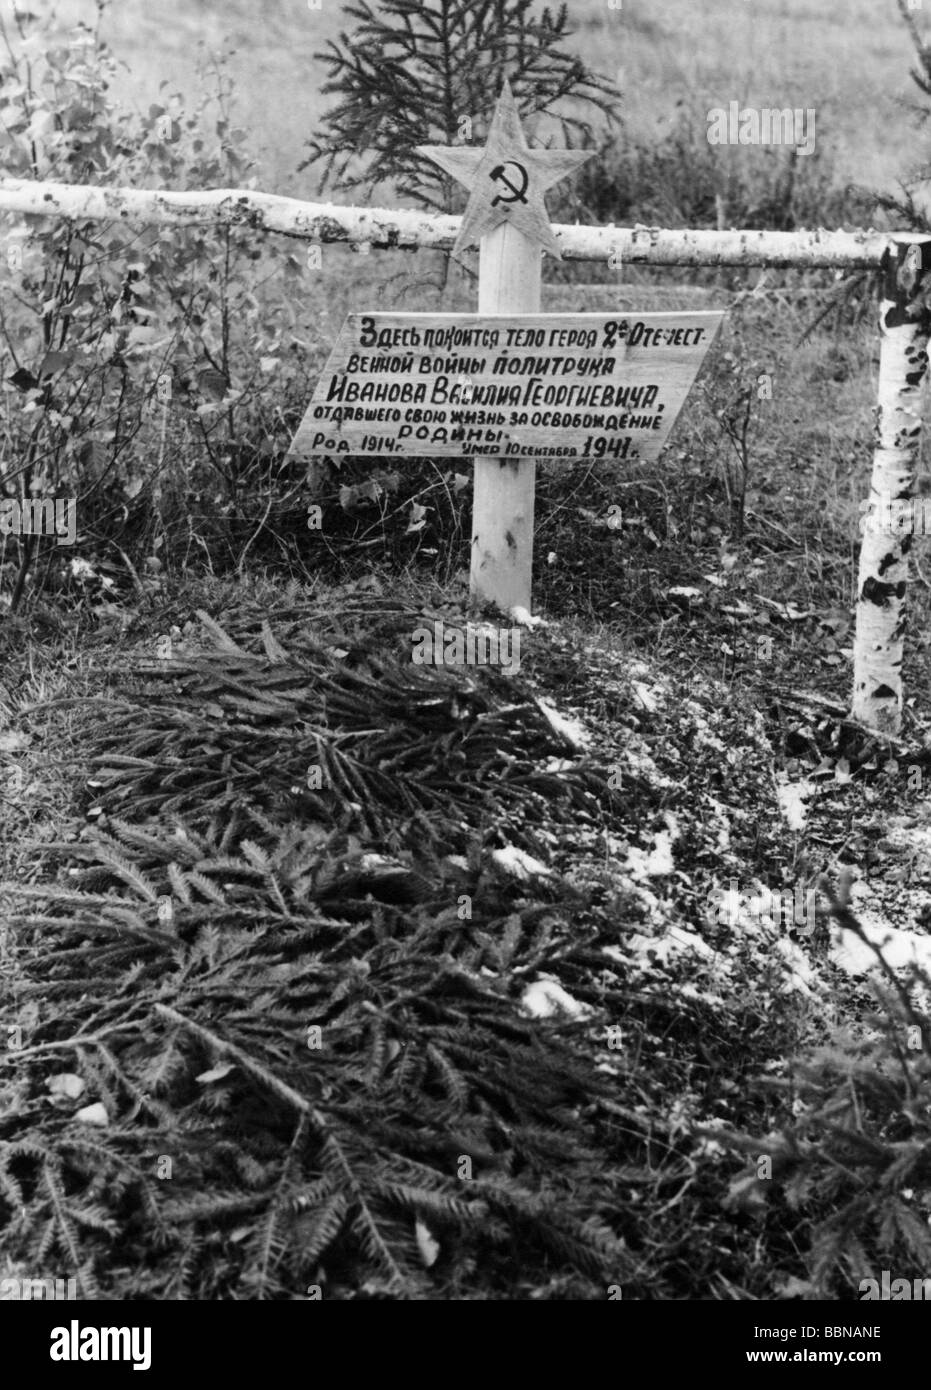 events, Second World War / WWII, Russia 1941, grave of Vasilij Georgevich Ivanov, political commissar of the Red Army, killed in action on 10.9.1941, photo taken by a German soldier, late 1941, Stock Photo